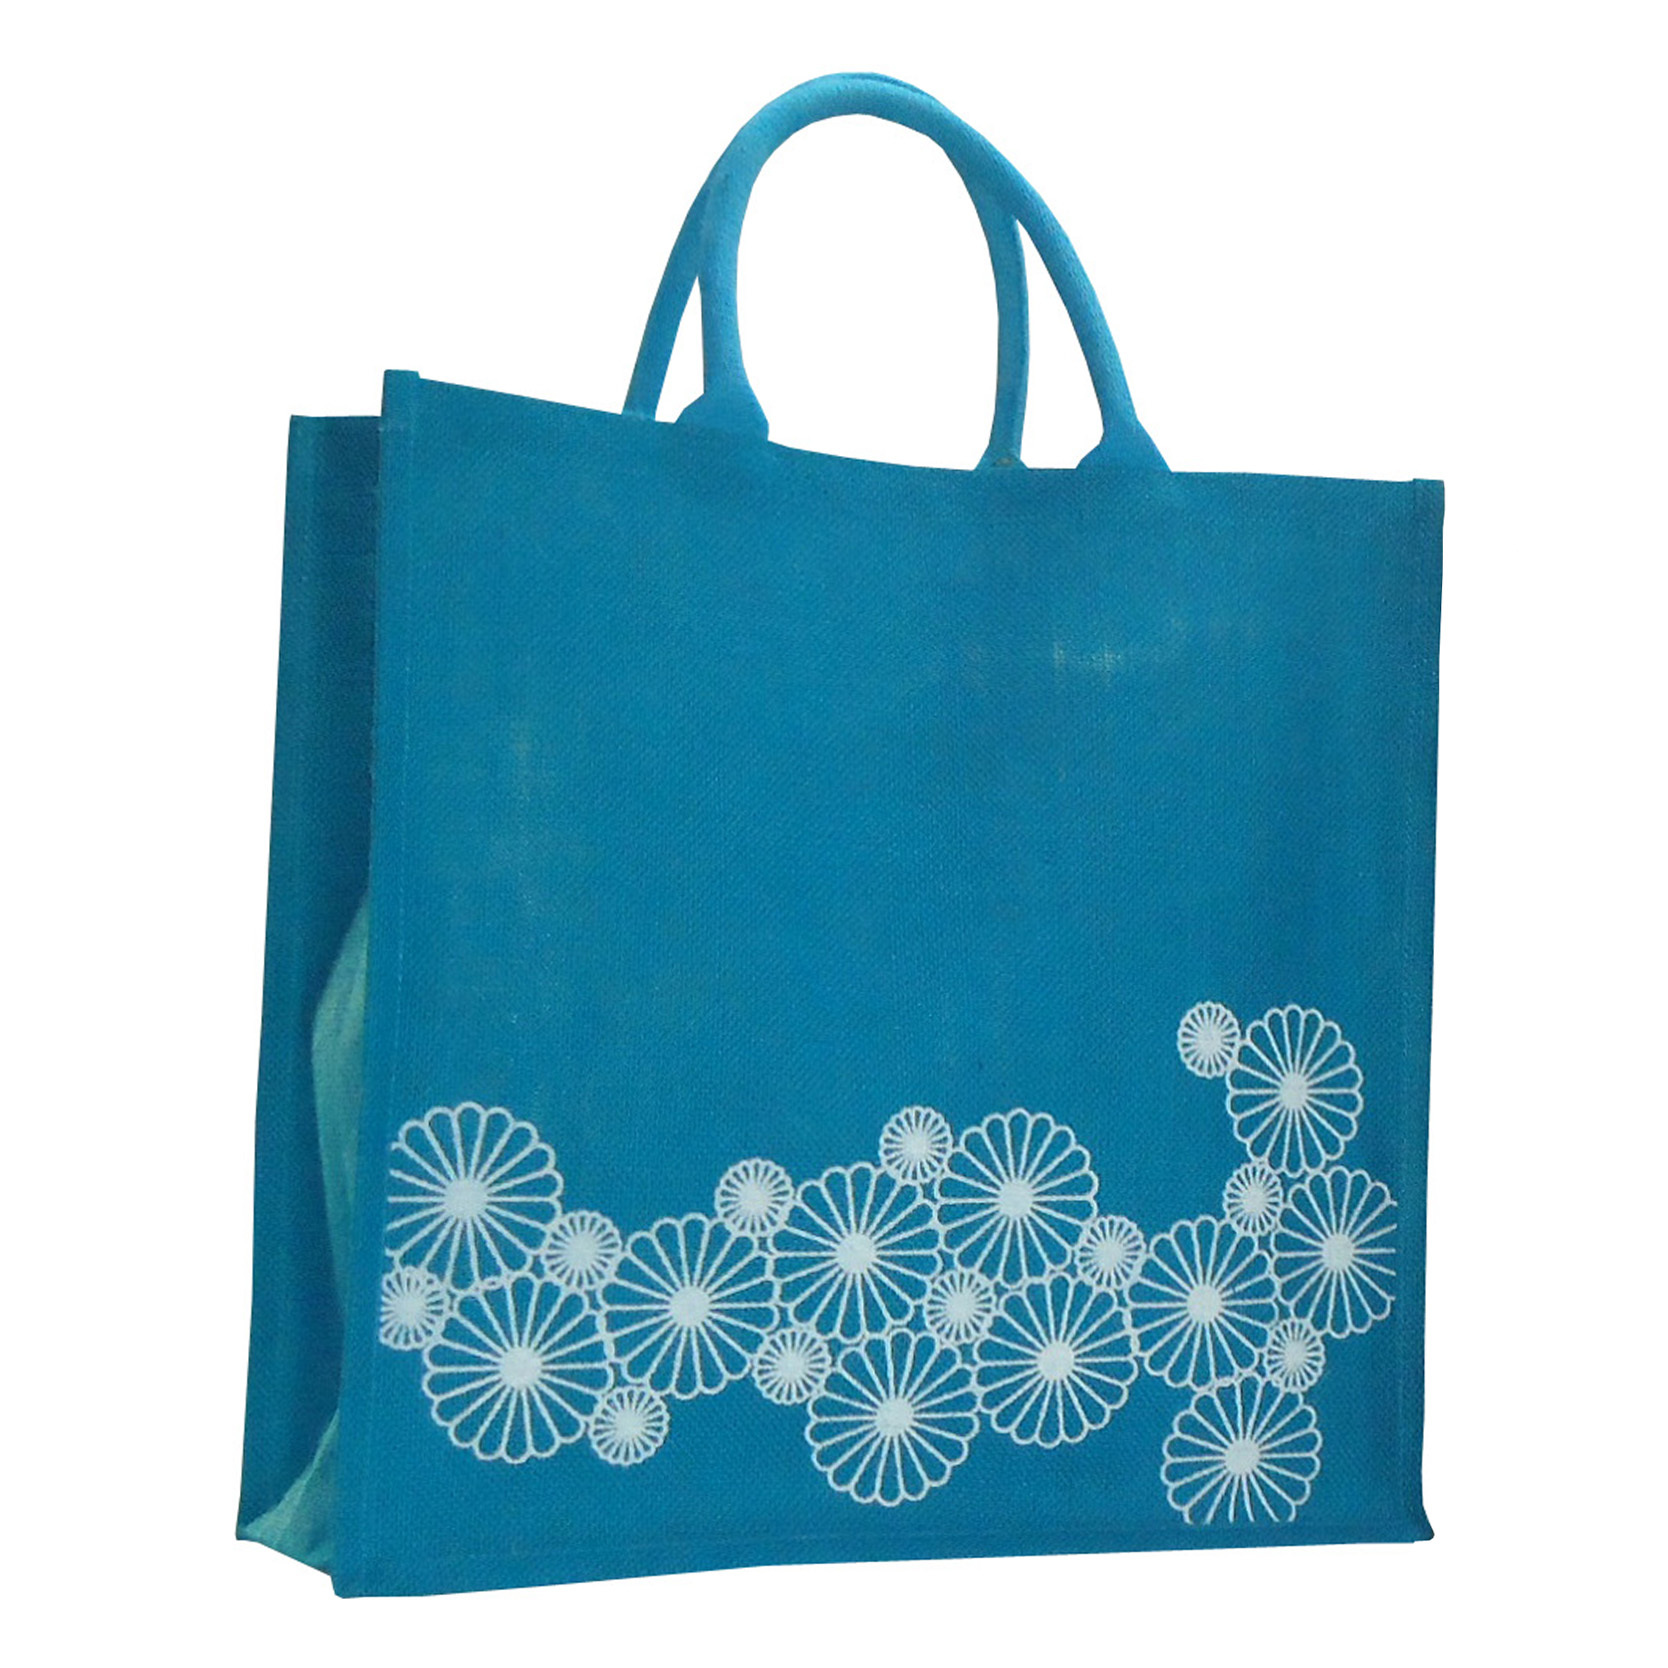 PP Laminated Jute Shopping Bag With Padded Rope Handle